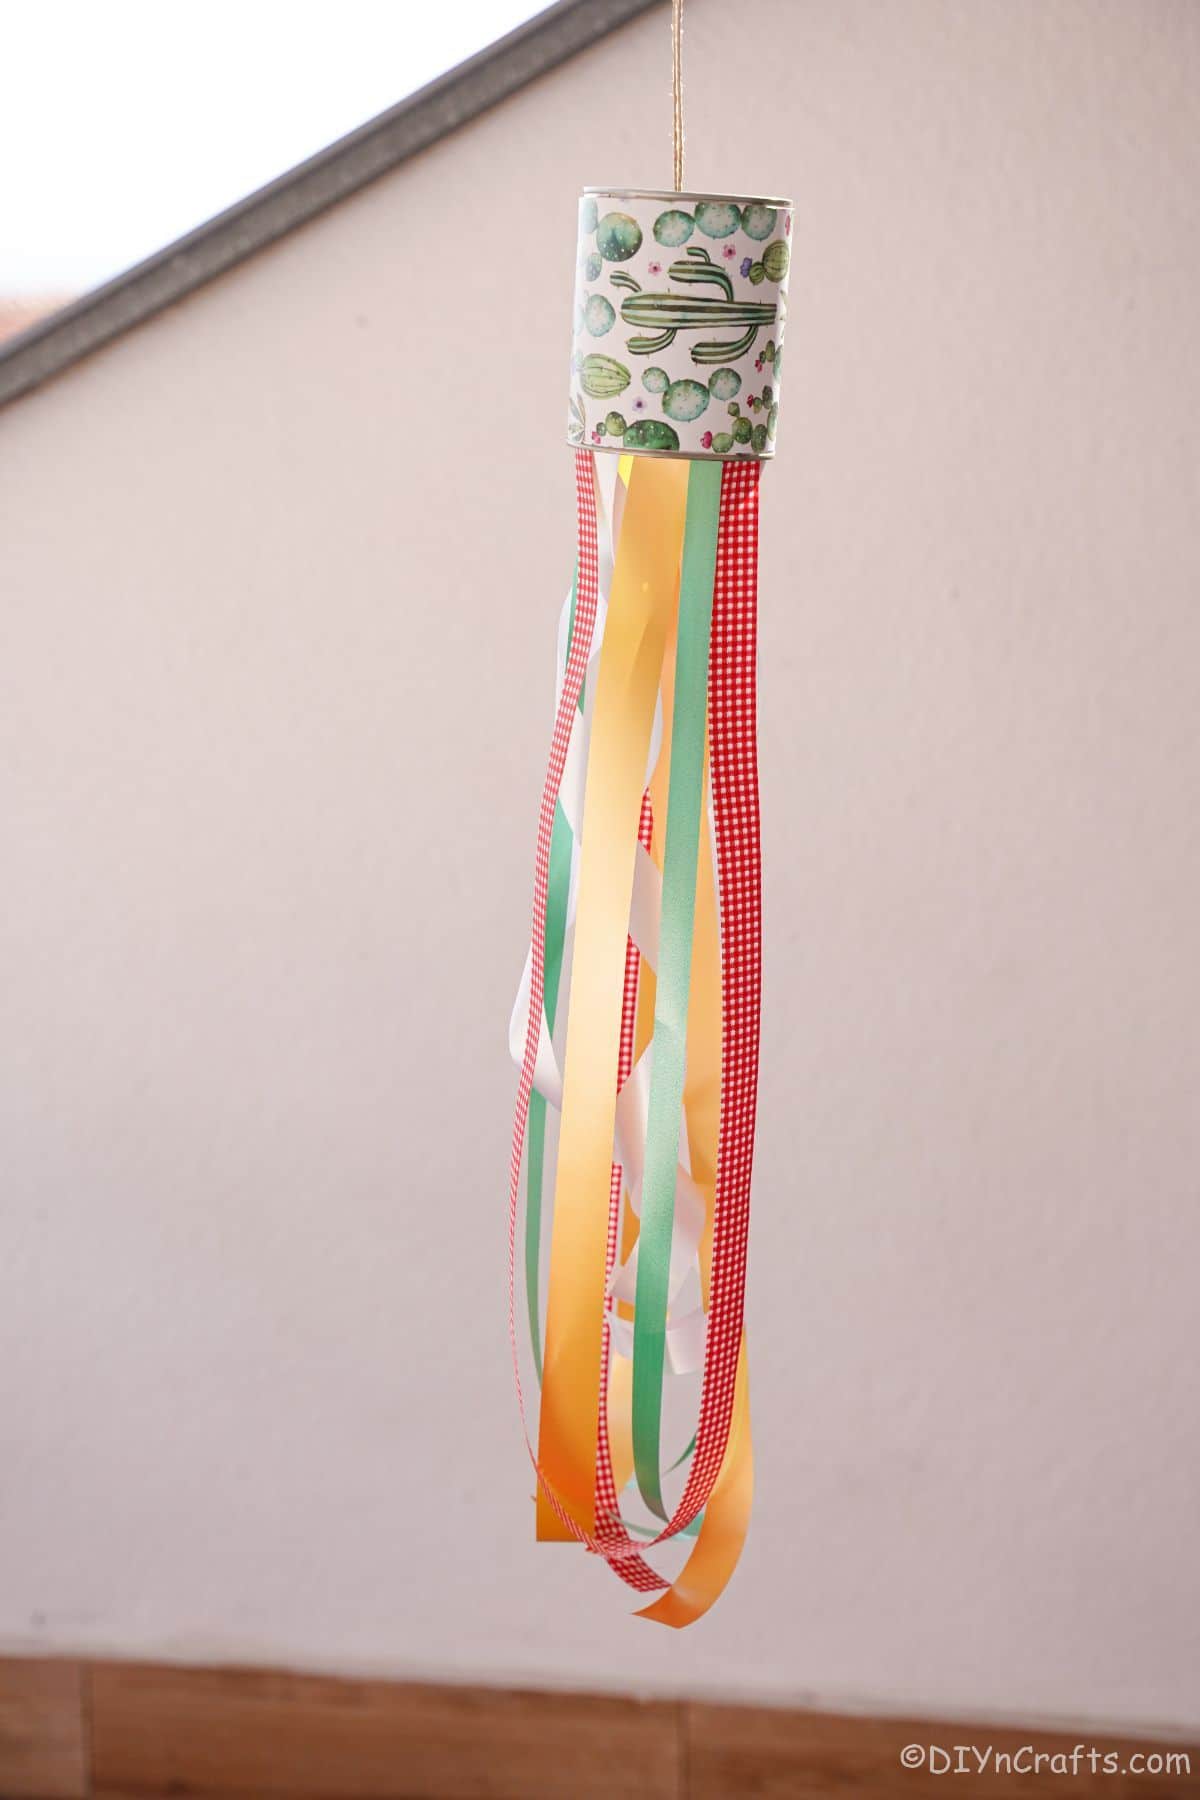 windsock made of cans and ribbons in front of a white wall